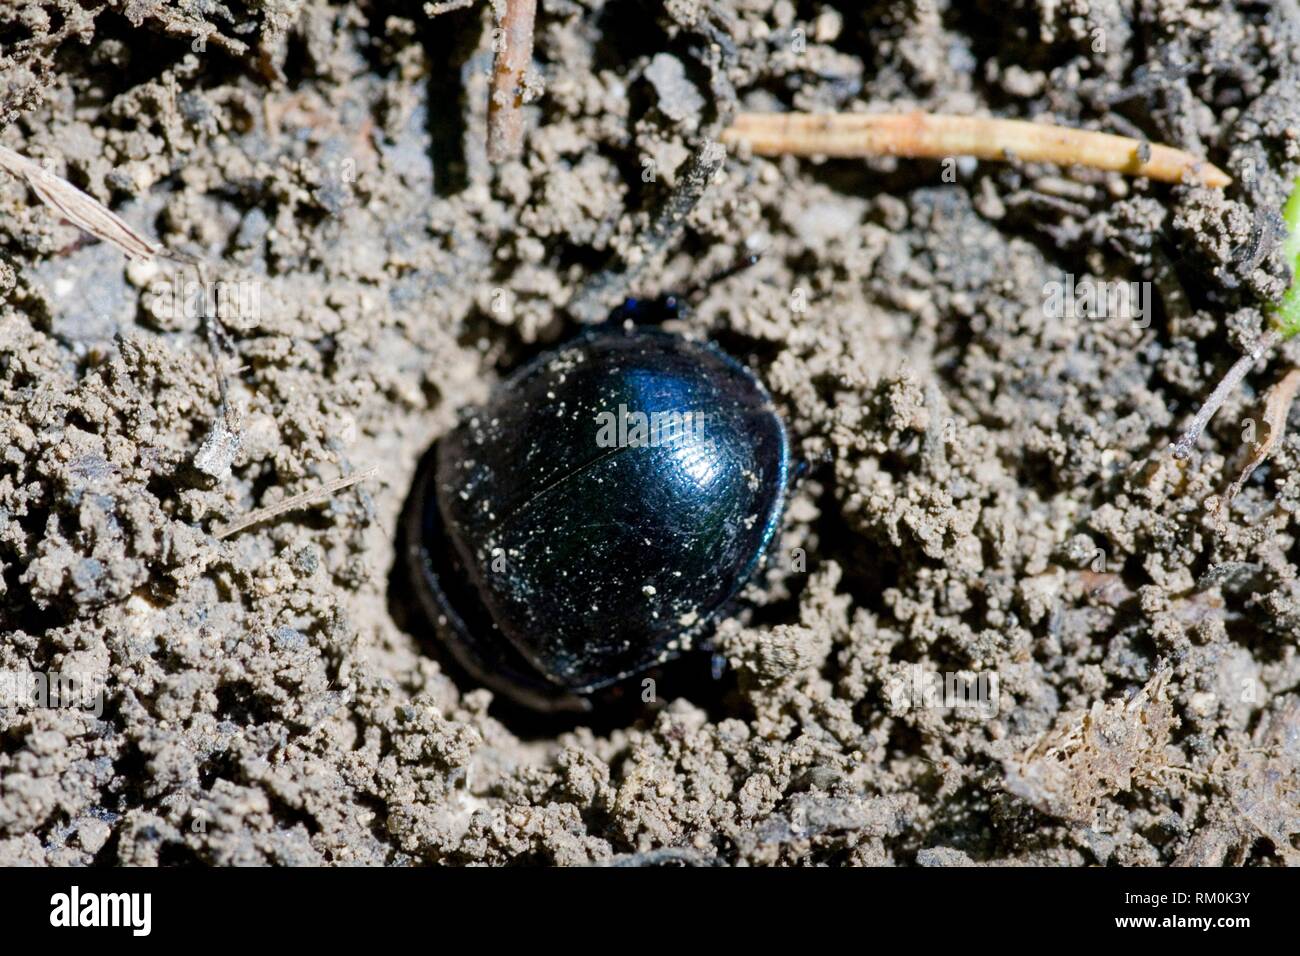 Dor Beetle, Anoplotrupes stercorosus, large, rotund earth-boring dung beetle of deep metallic midnight blue, easily confused with Geotrupes or Stock Photo